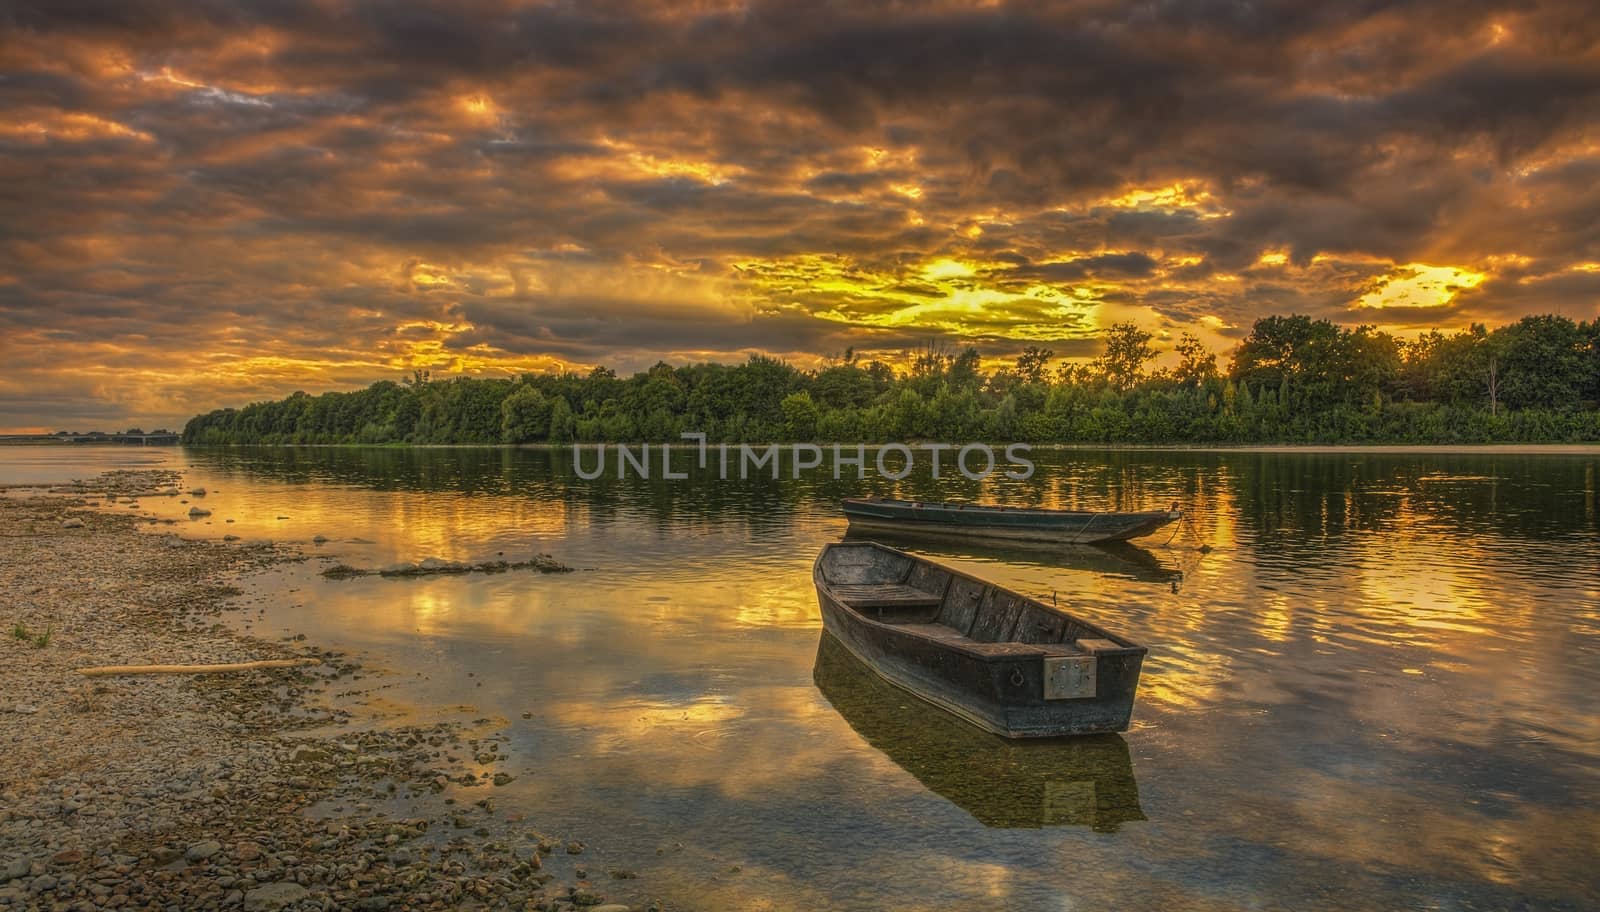 Sunset on the Loire River in France by RazvanPhotography